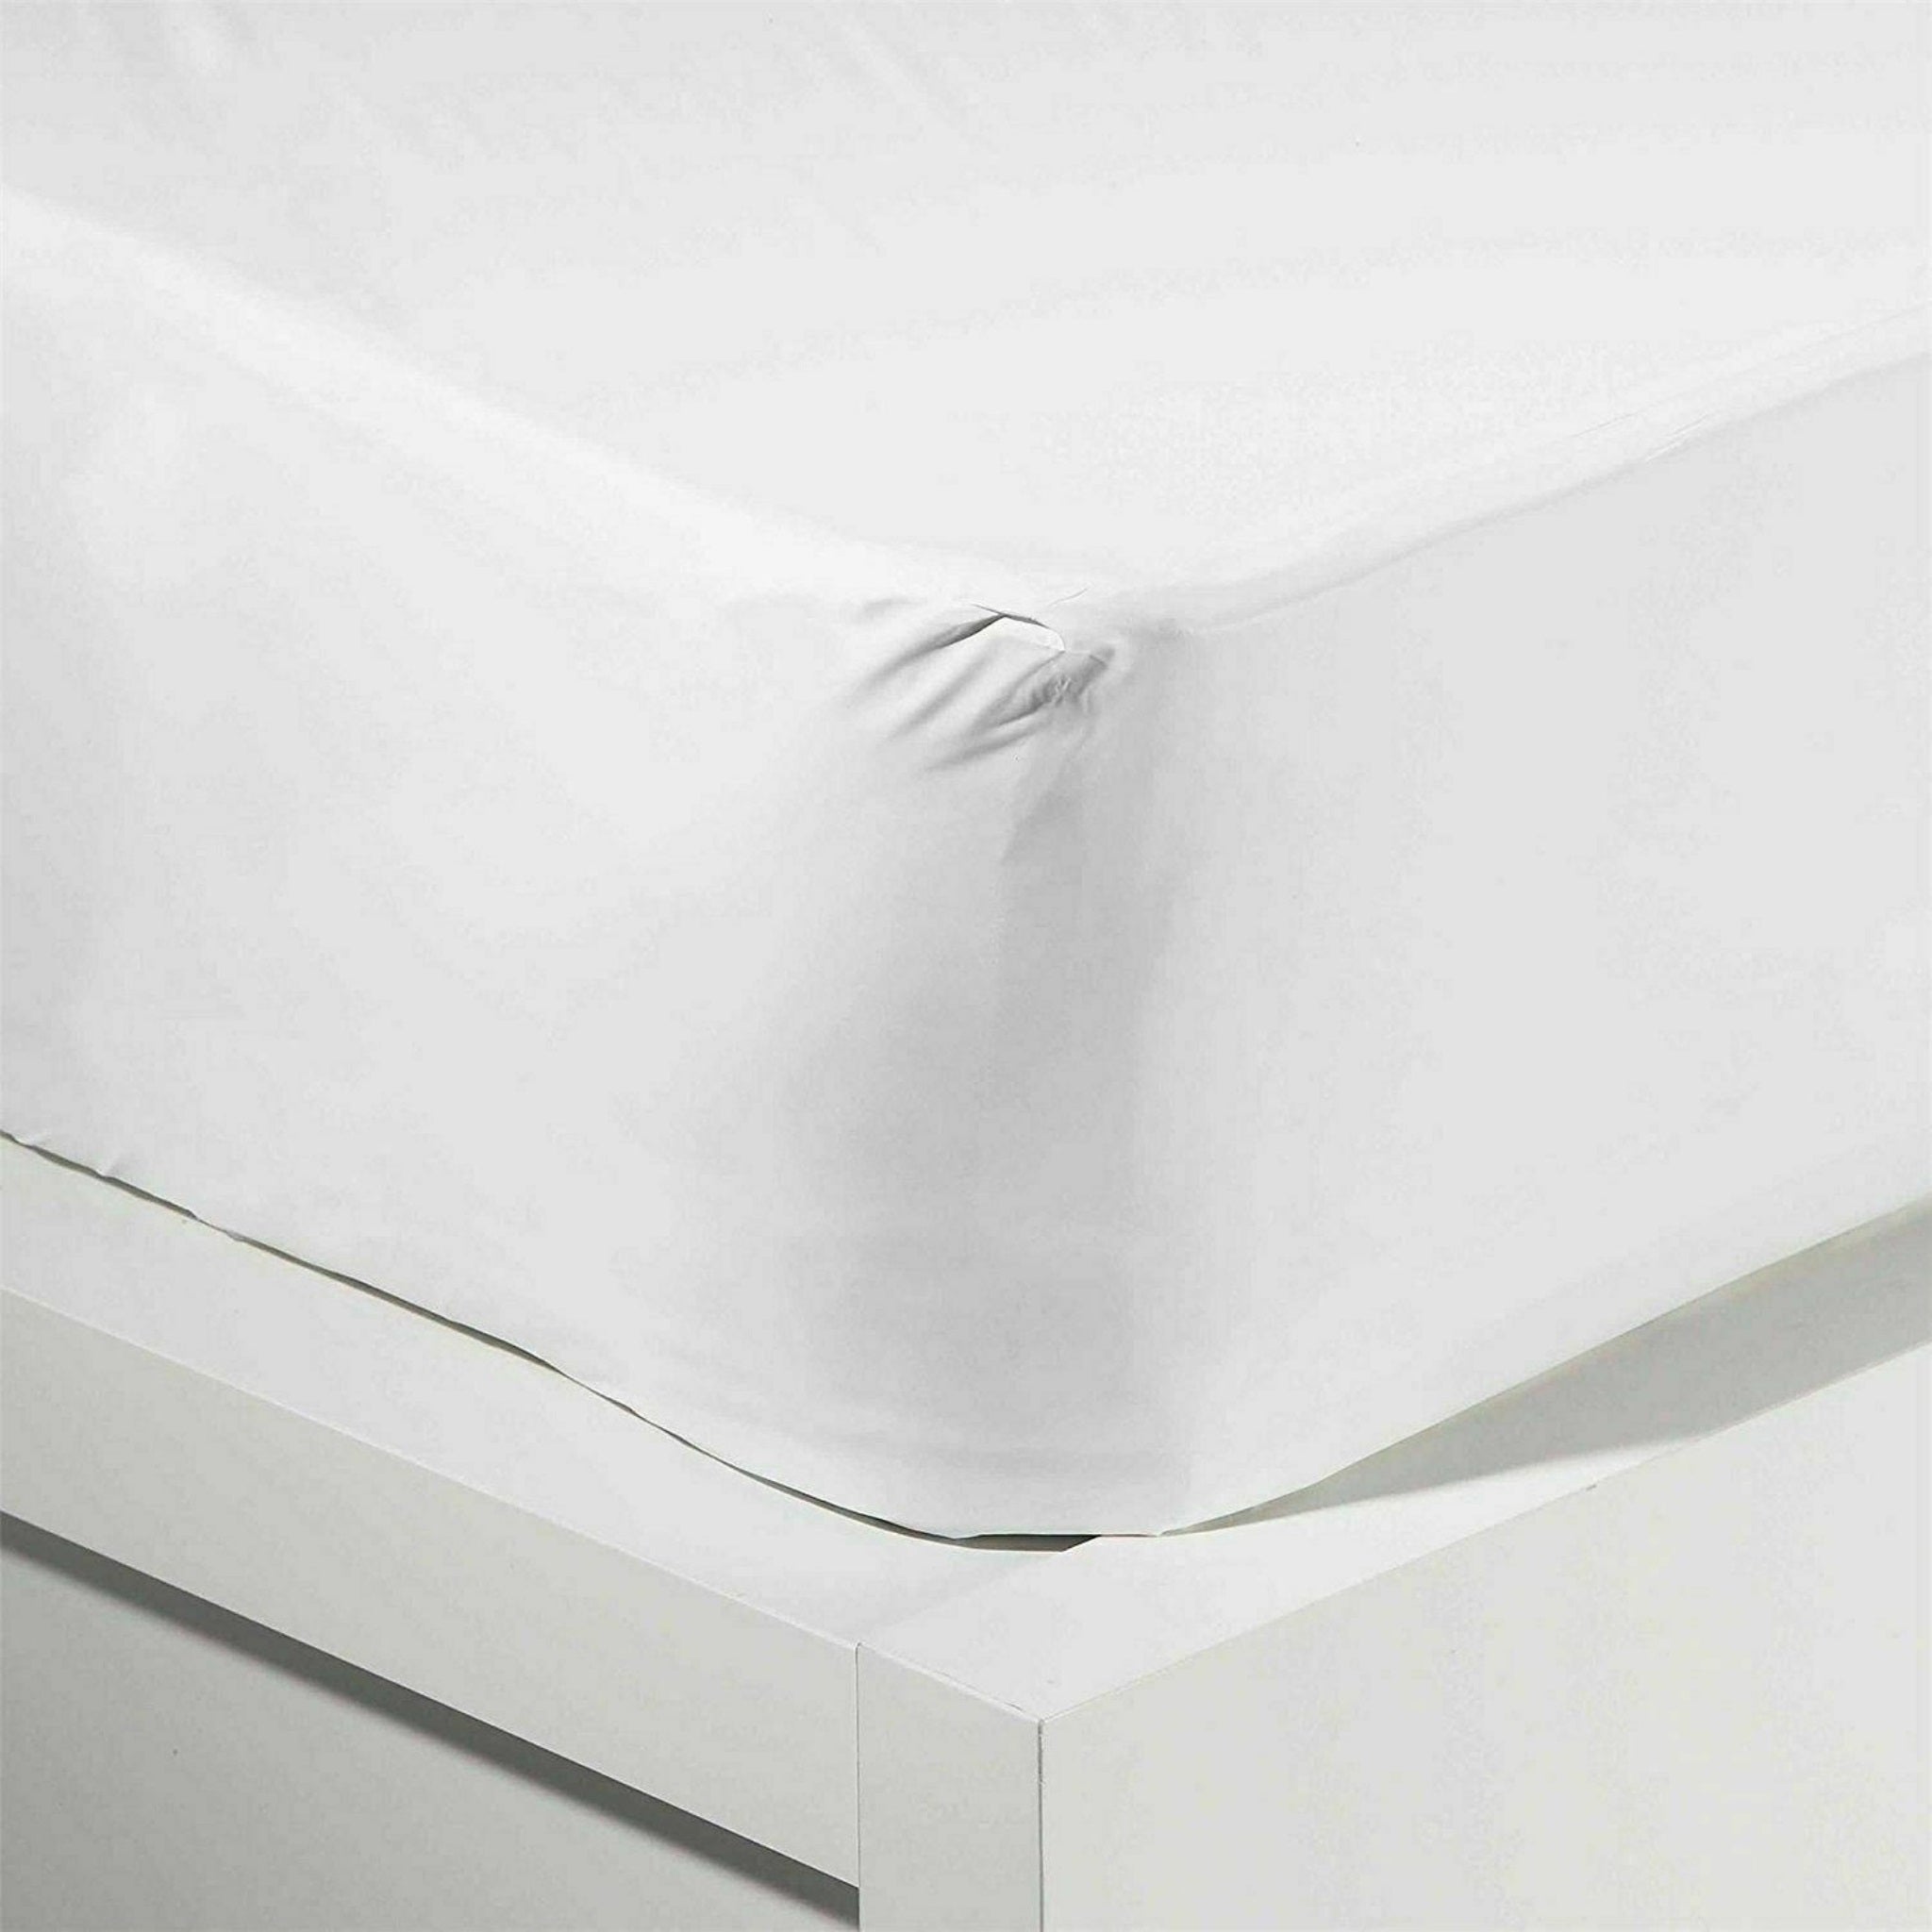 Beclen Harp New King Waterproof Mattress Protector Anti bed Bug Cover Fitted Wet Sheet Nursery Bedding